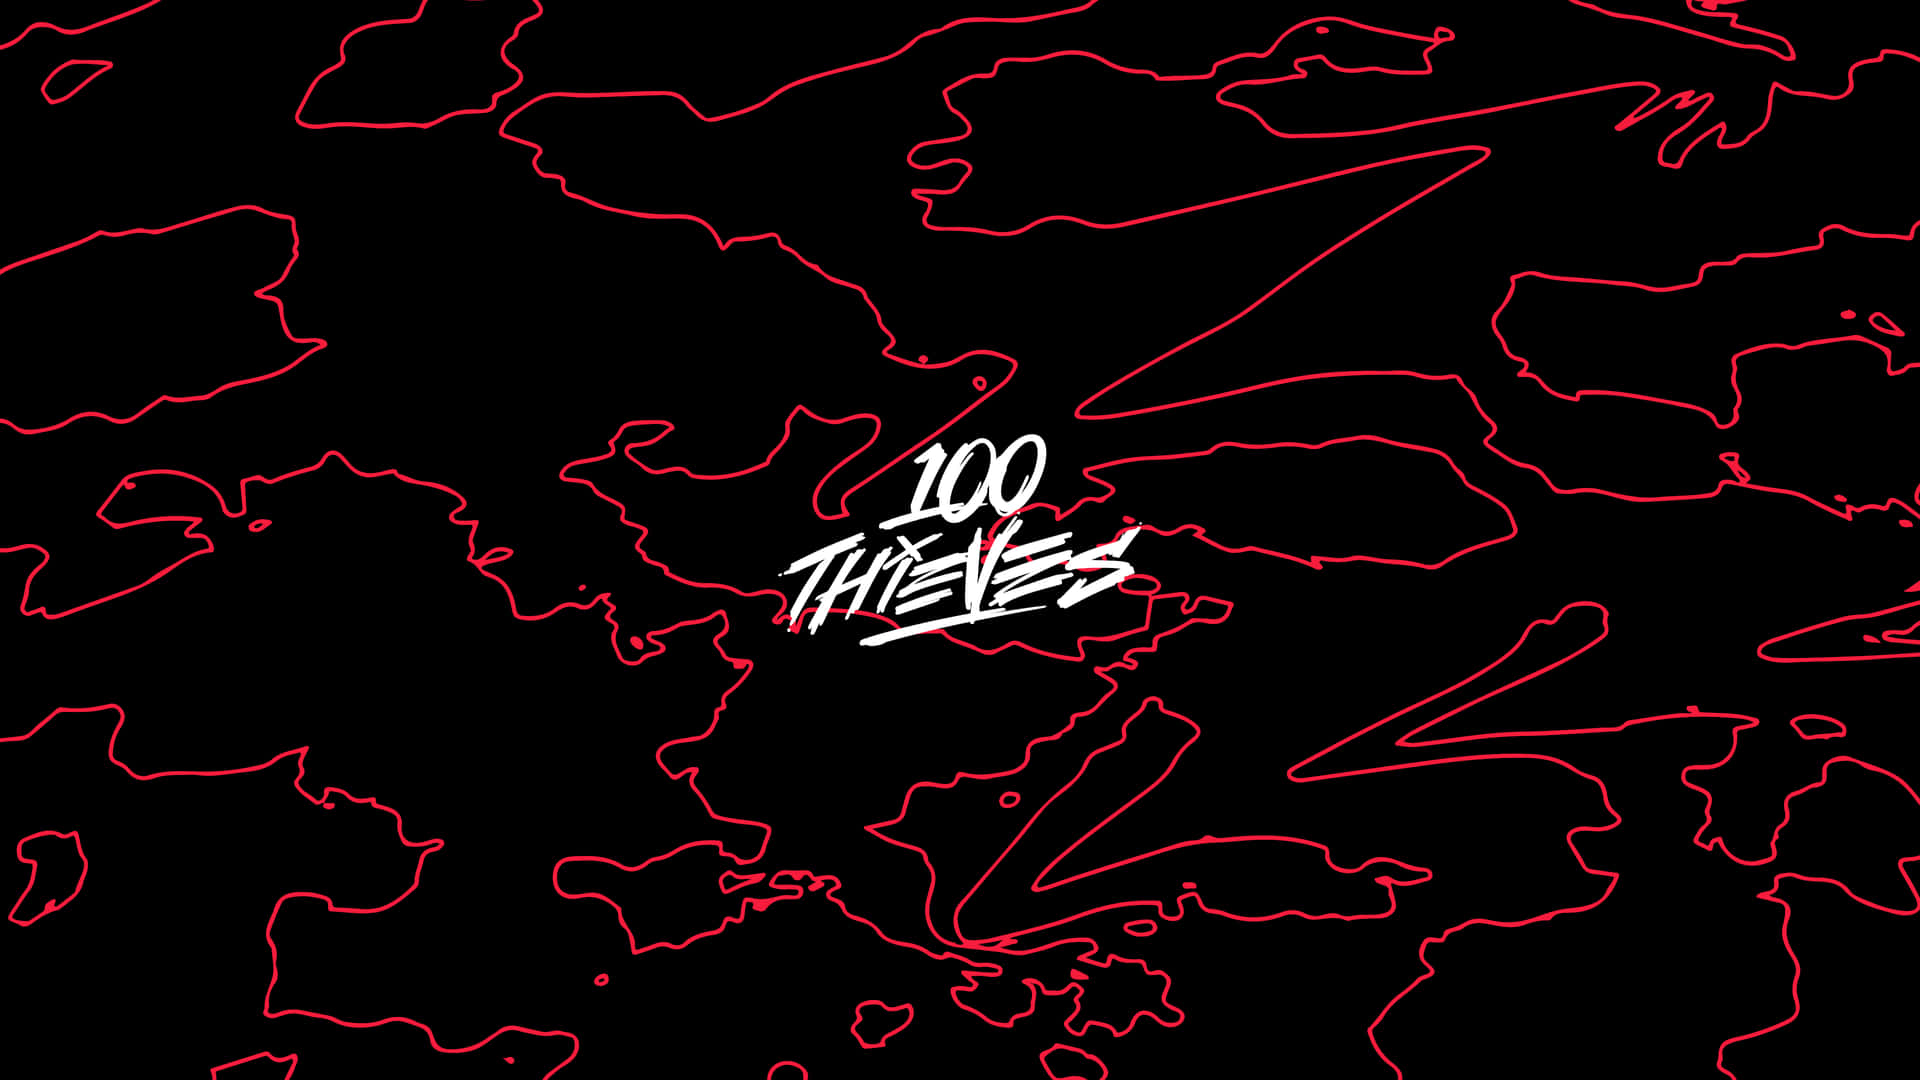 Dope Ps4 100 Thieves Wallpaper